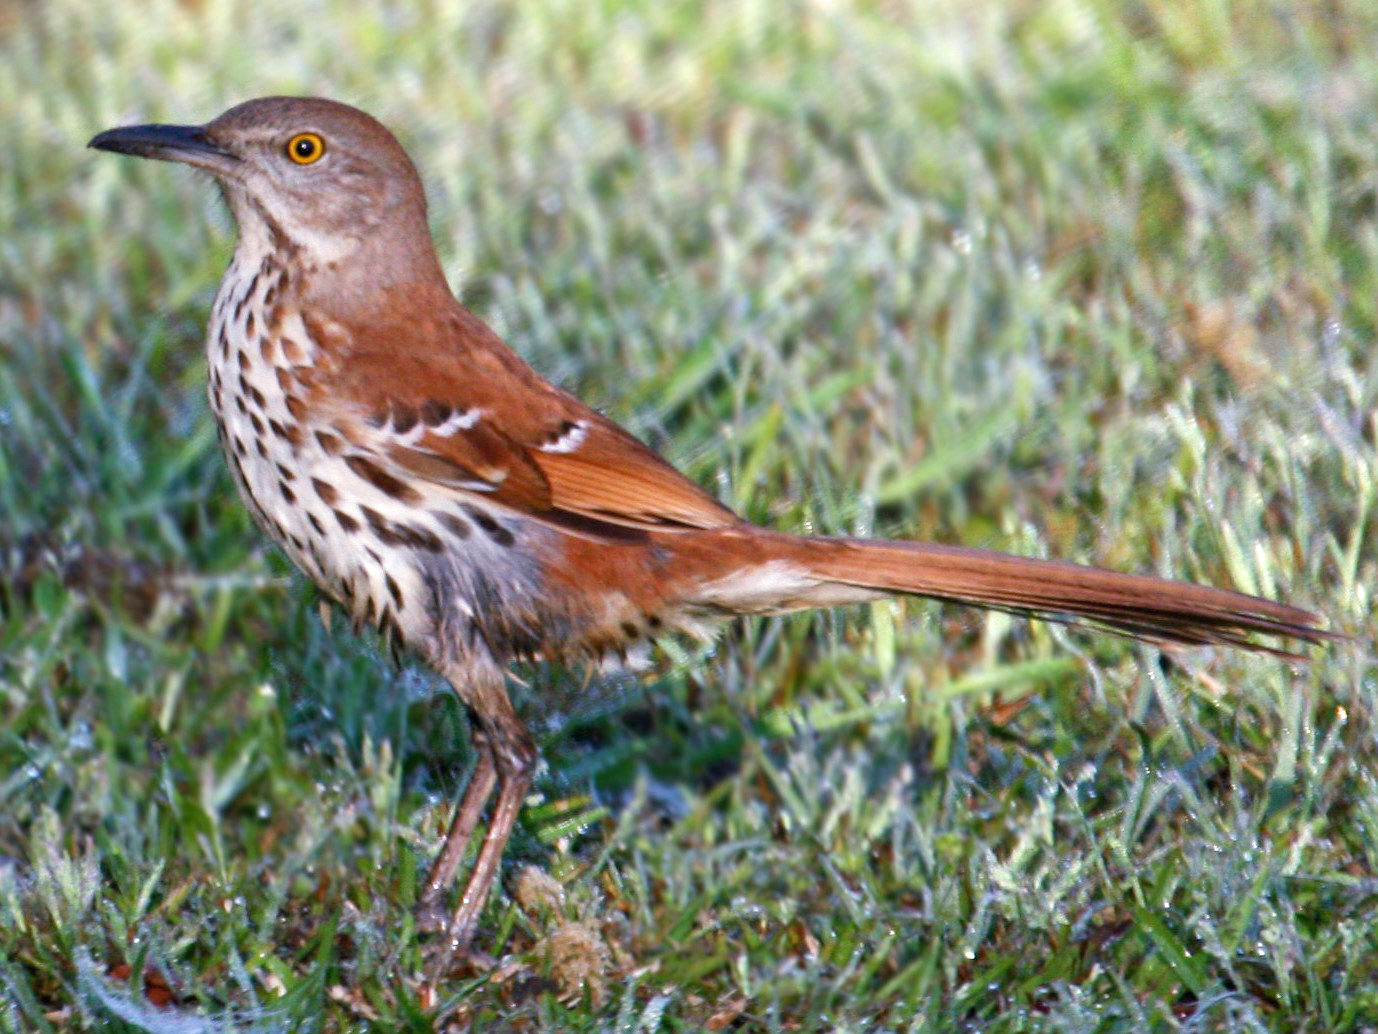 A brown-backed bird with a